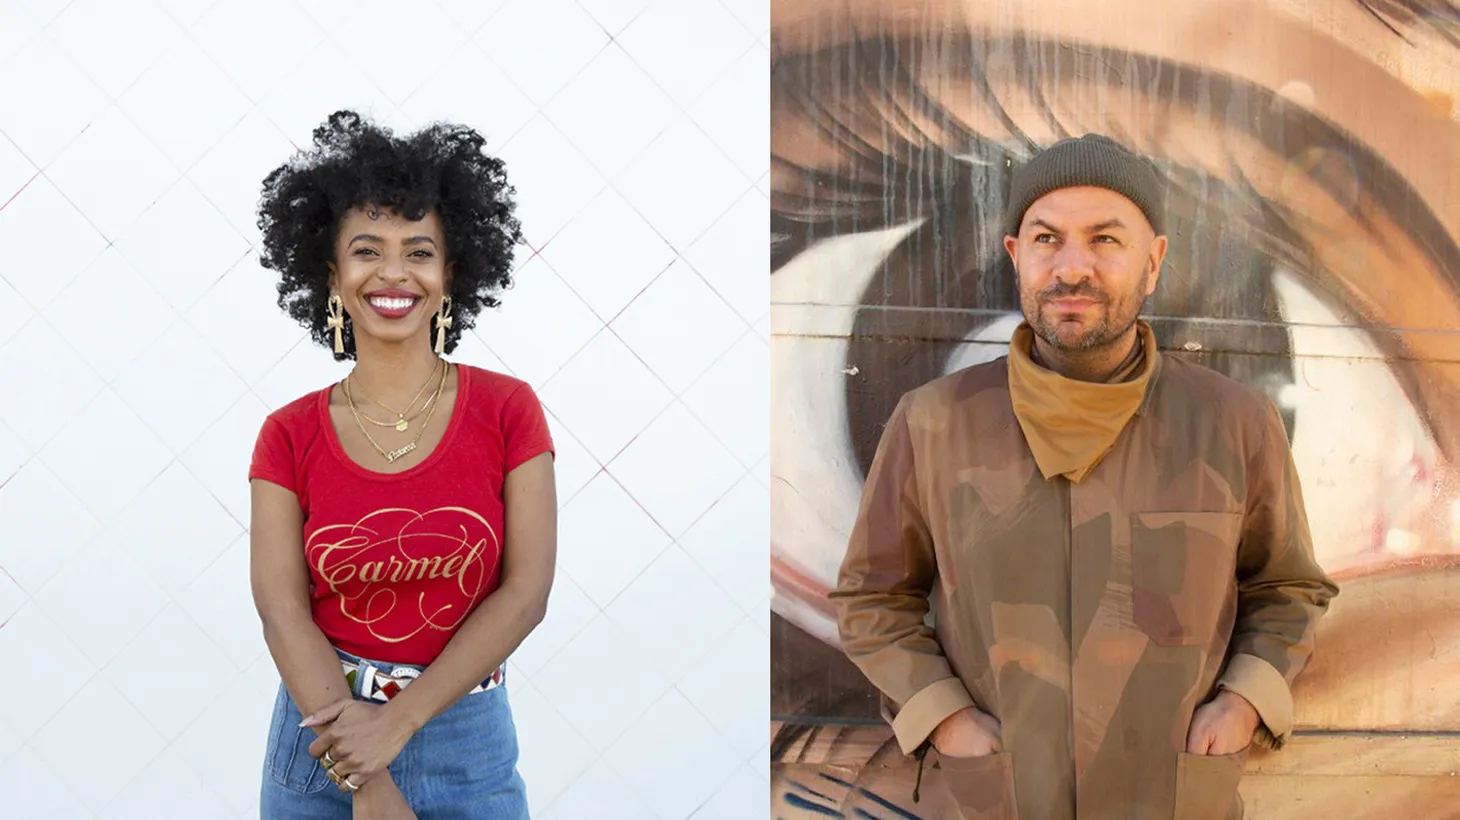 KCRW's signature music program features new releases, live performances, and artist interviews hosted by Anthony Valadez & Novena Carmel.